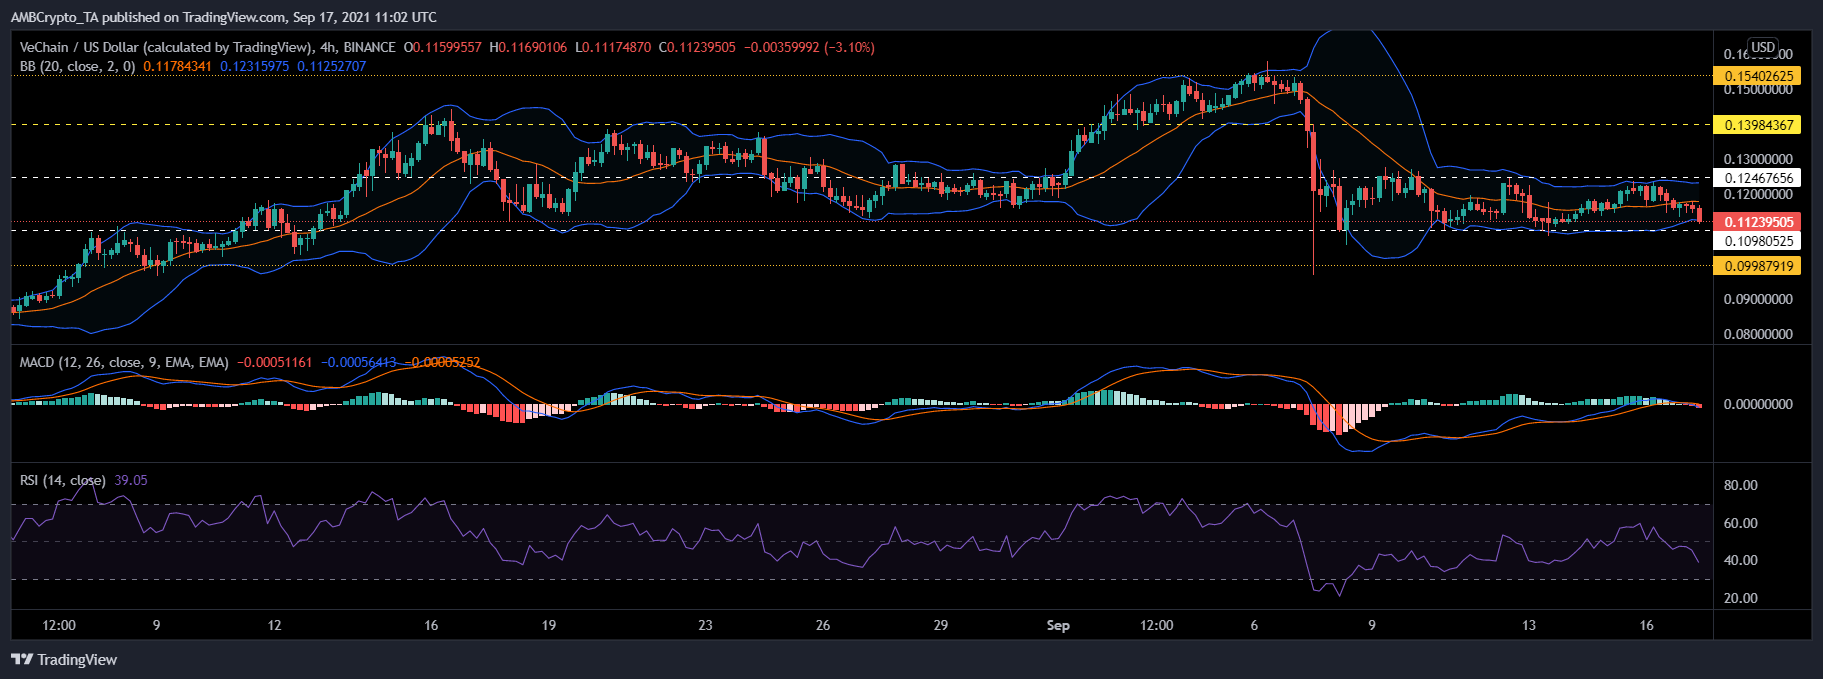 EOS, Enjin and VeChain Price Analysis: 17 September 